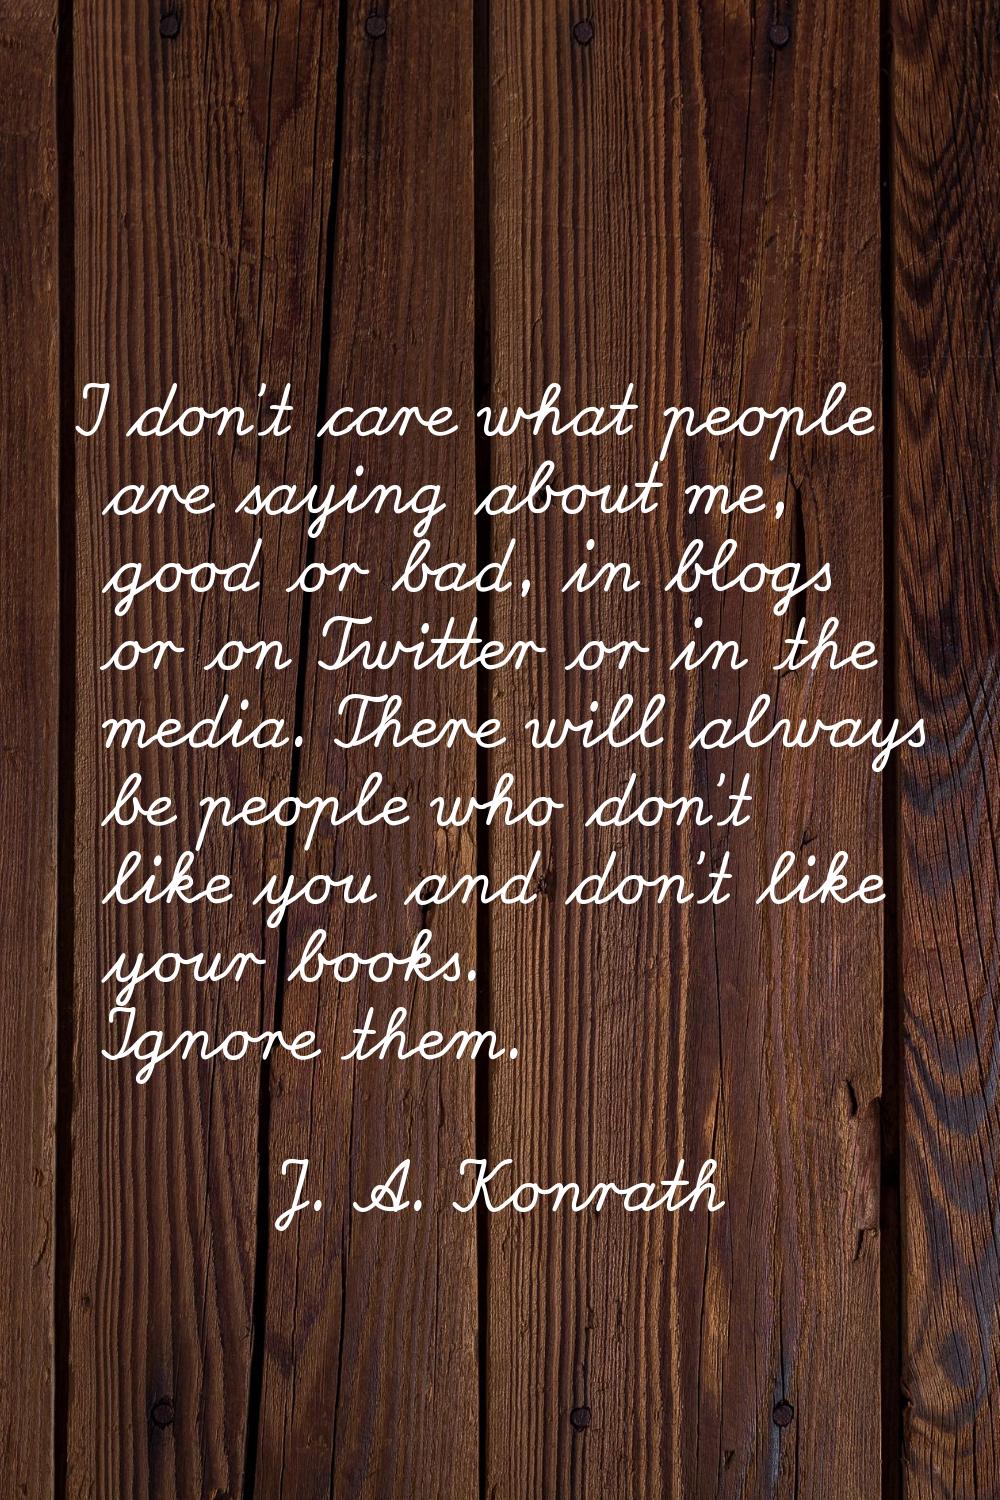 I don't care what people are saying about me, good or bad, in blogs or on Twitter or in the media. 